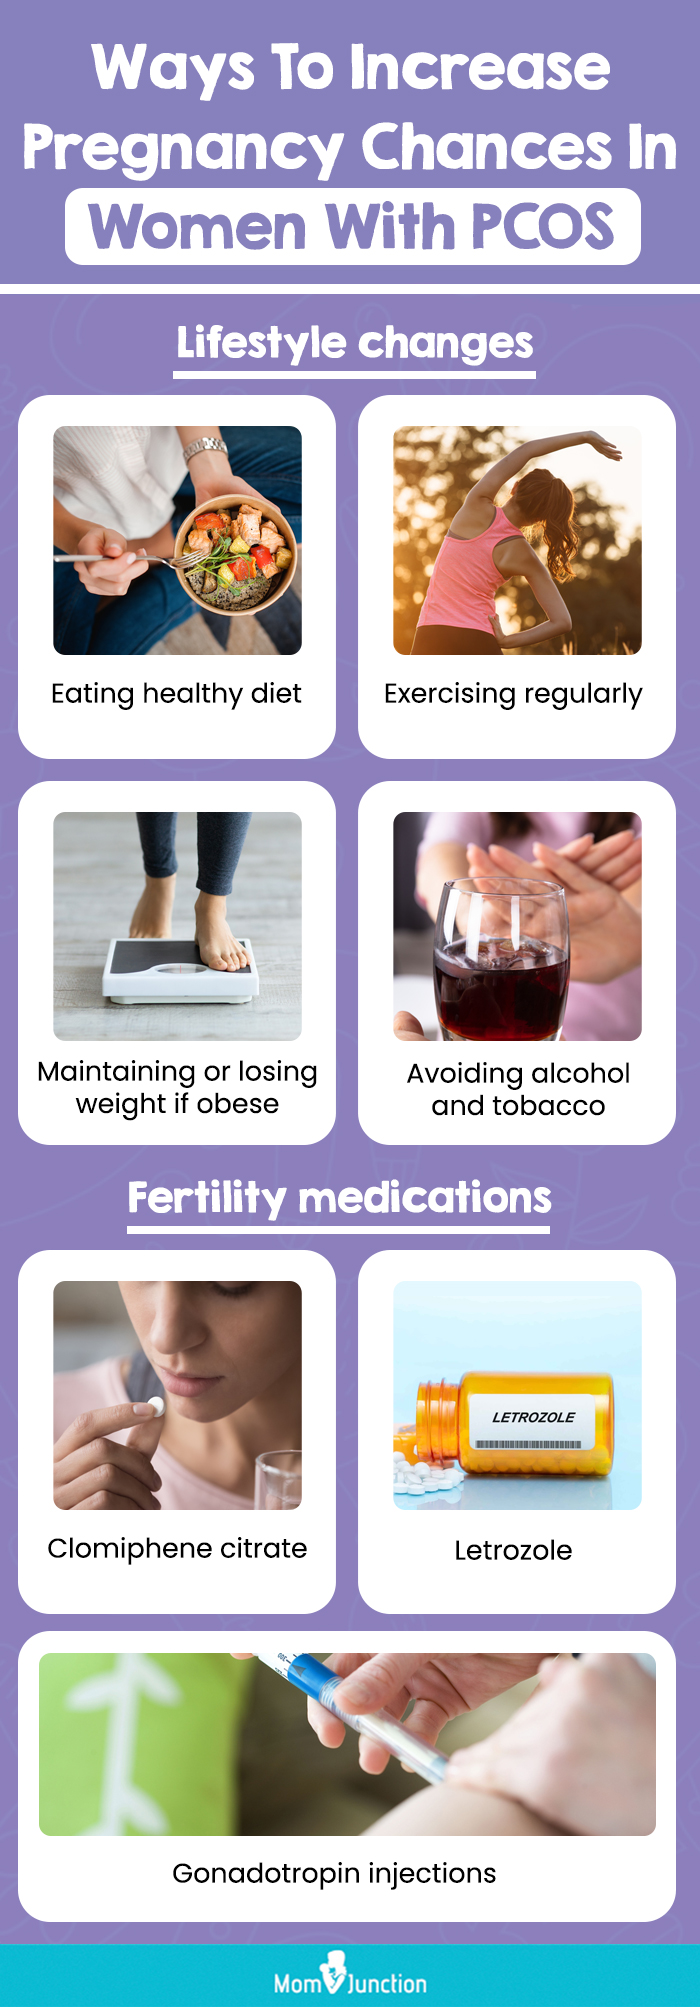 ways to increase pregnancy chances in women with pcos (infographic)